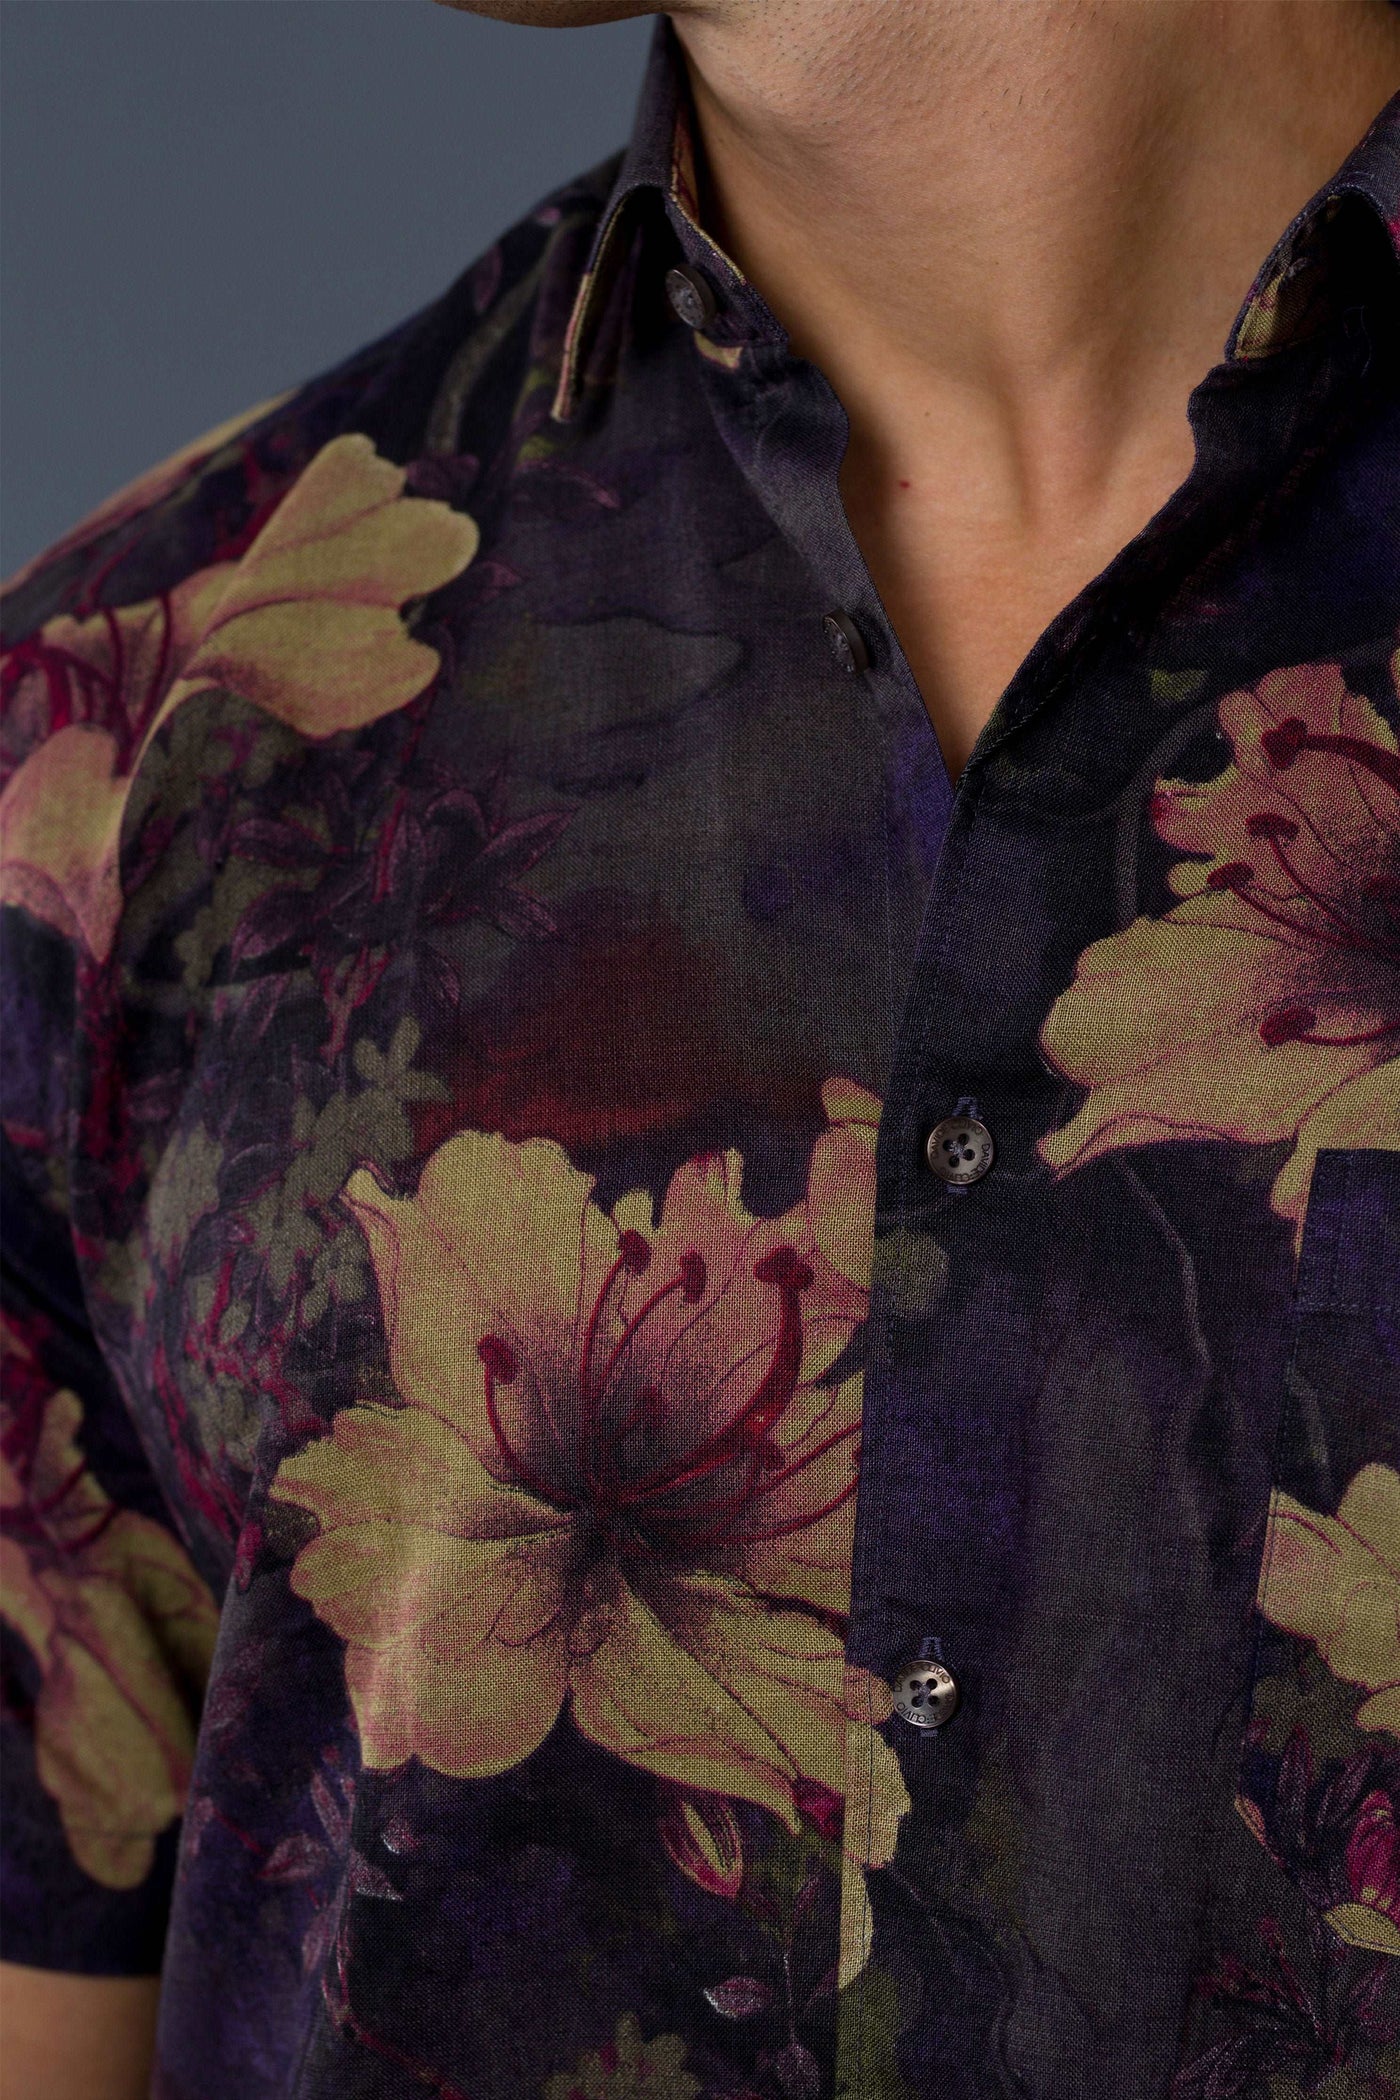 Floral Printed S/S Shirt